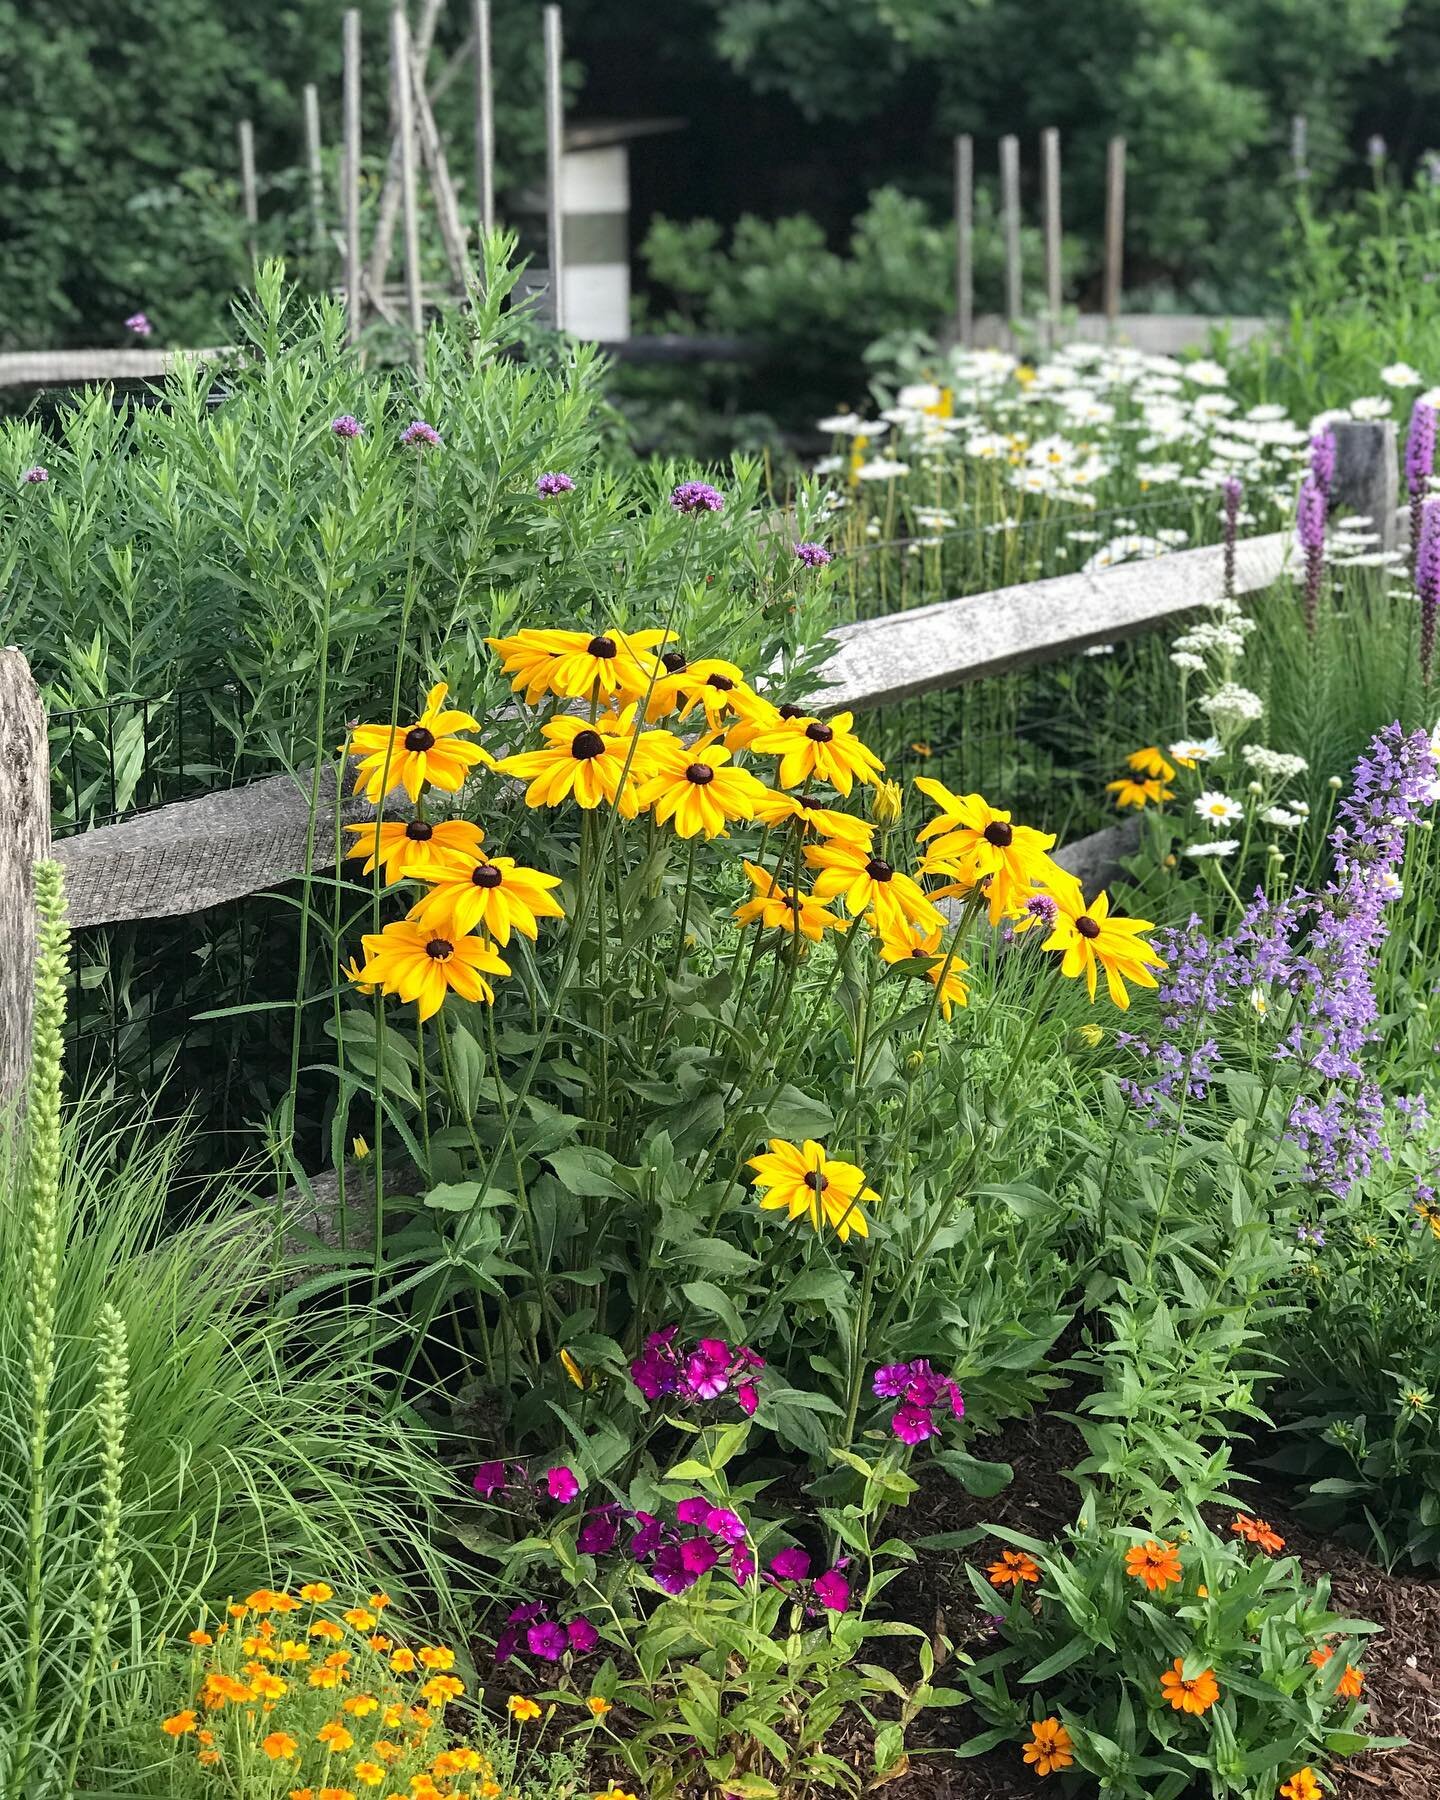 Neighbors have been commenting on the tall yellow brown-eyed Susan: Rudbeckia Indian Summer, combined with phlox Nikky, Tangerine Gem marigold, Becky daisy, catmint, and an agastache coming on inside the veggie garden fence. Love the cottage garden s